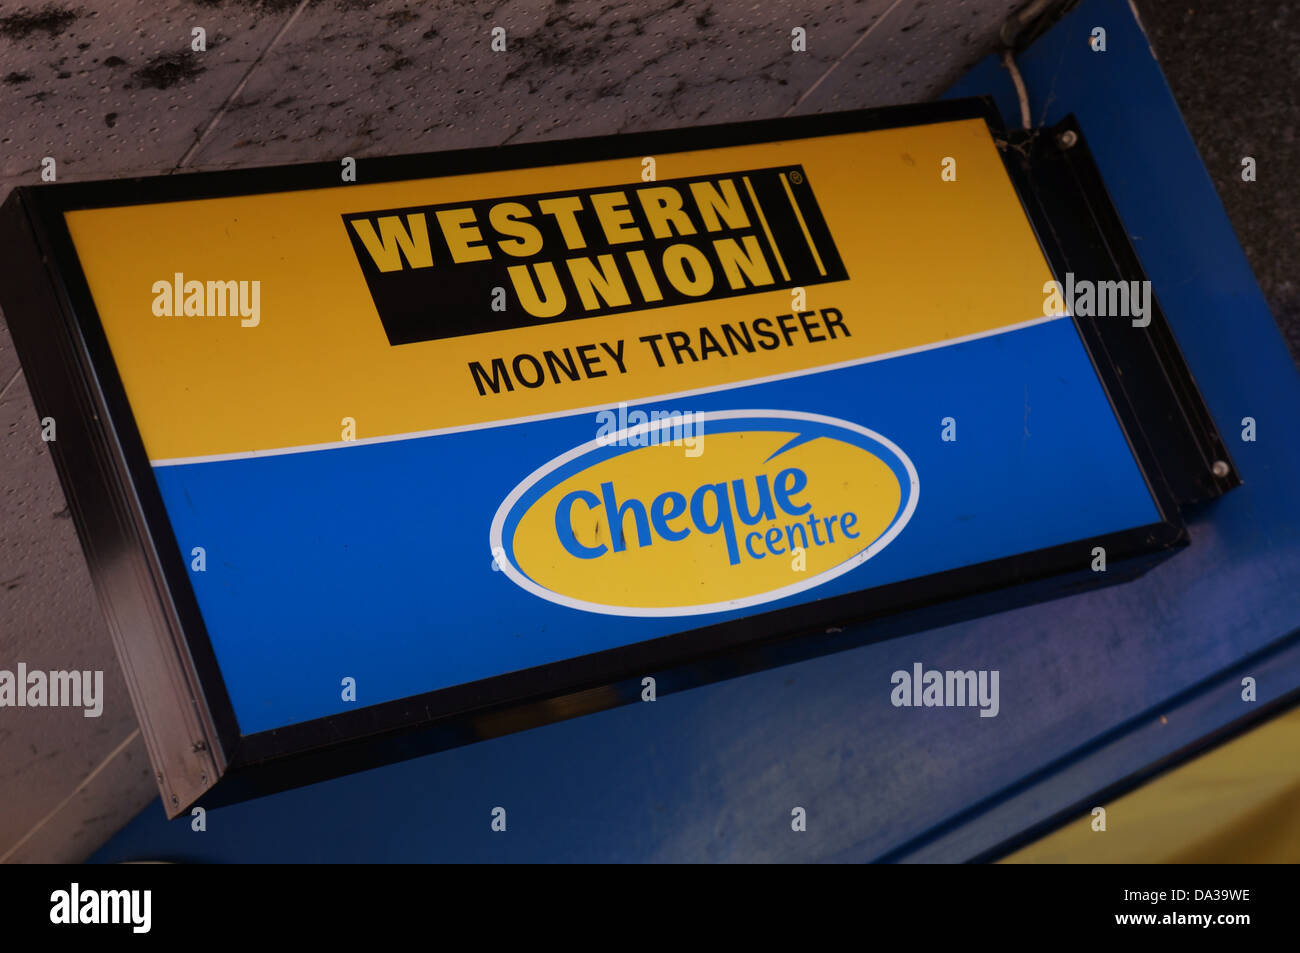 western union money transfer sign on cheque centre shop front Stock Photo